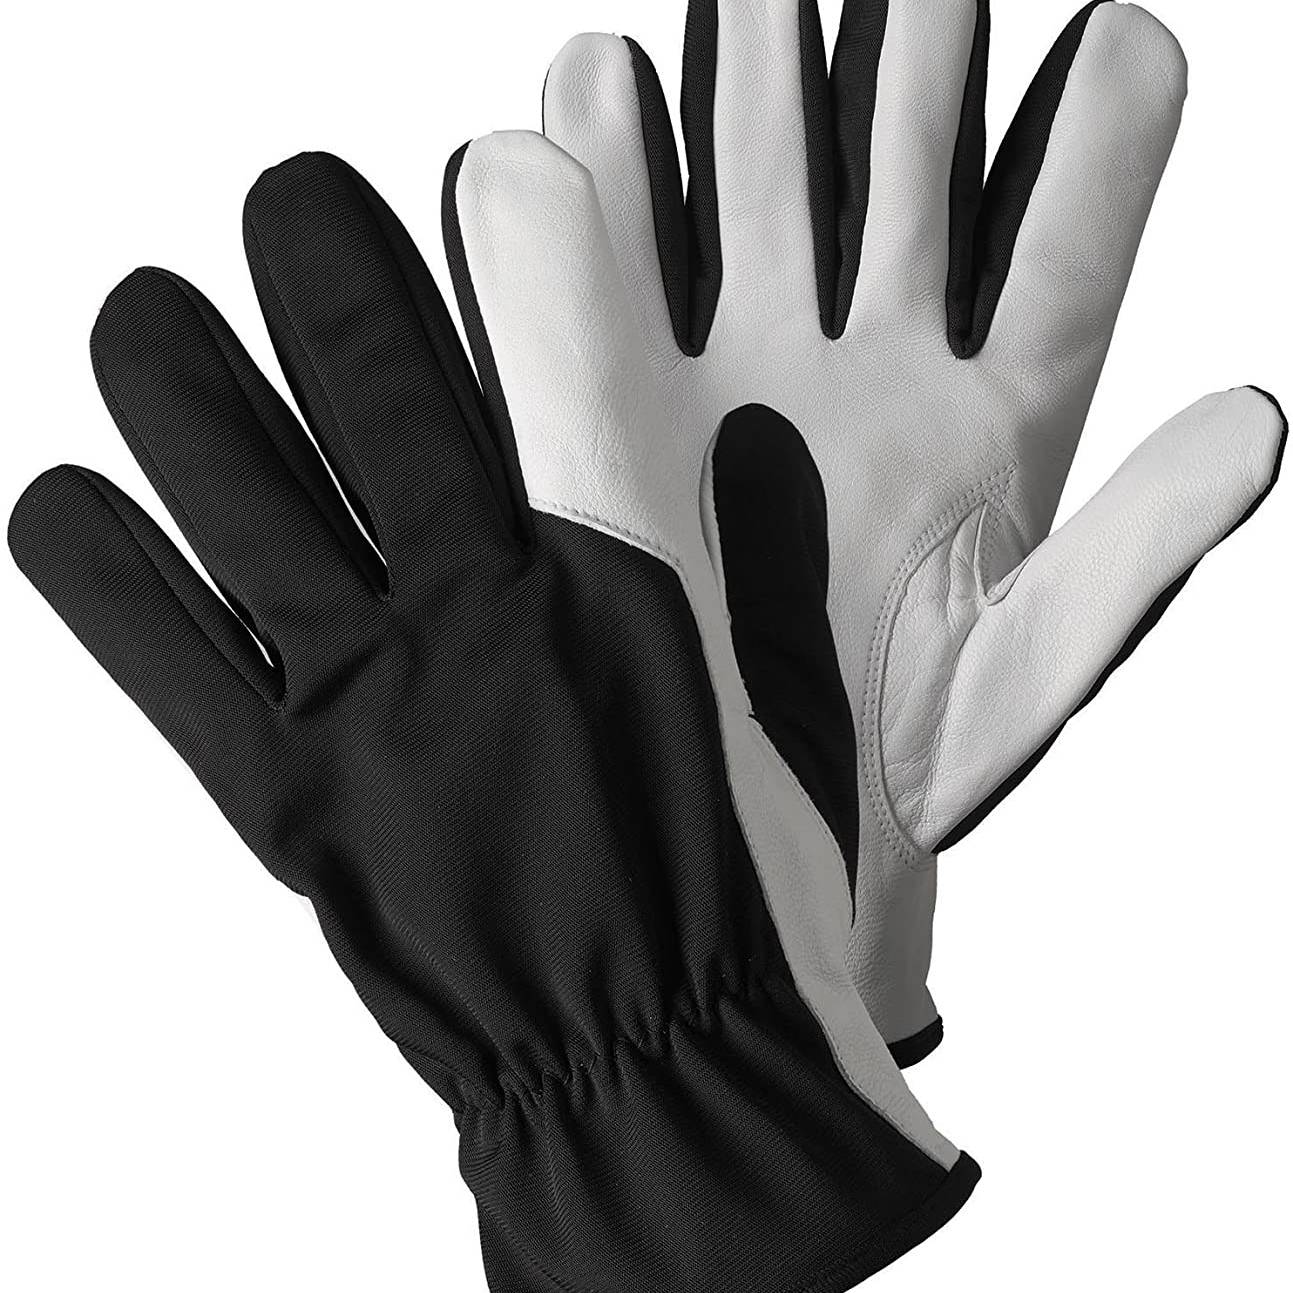 Smart Garden Super Soft and Strong Leather Glove (L) Black